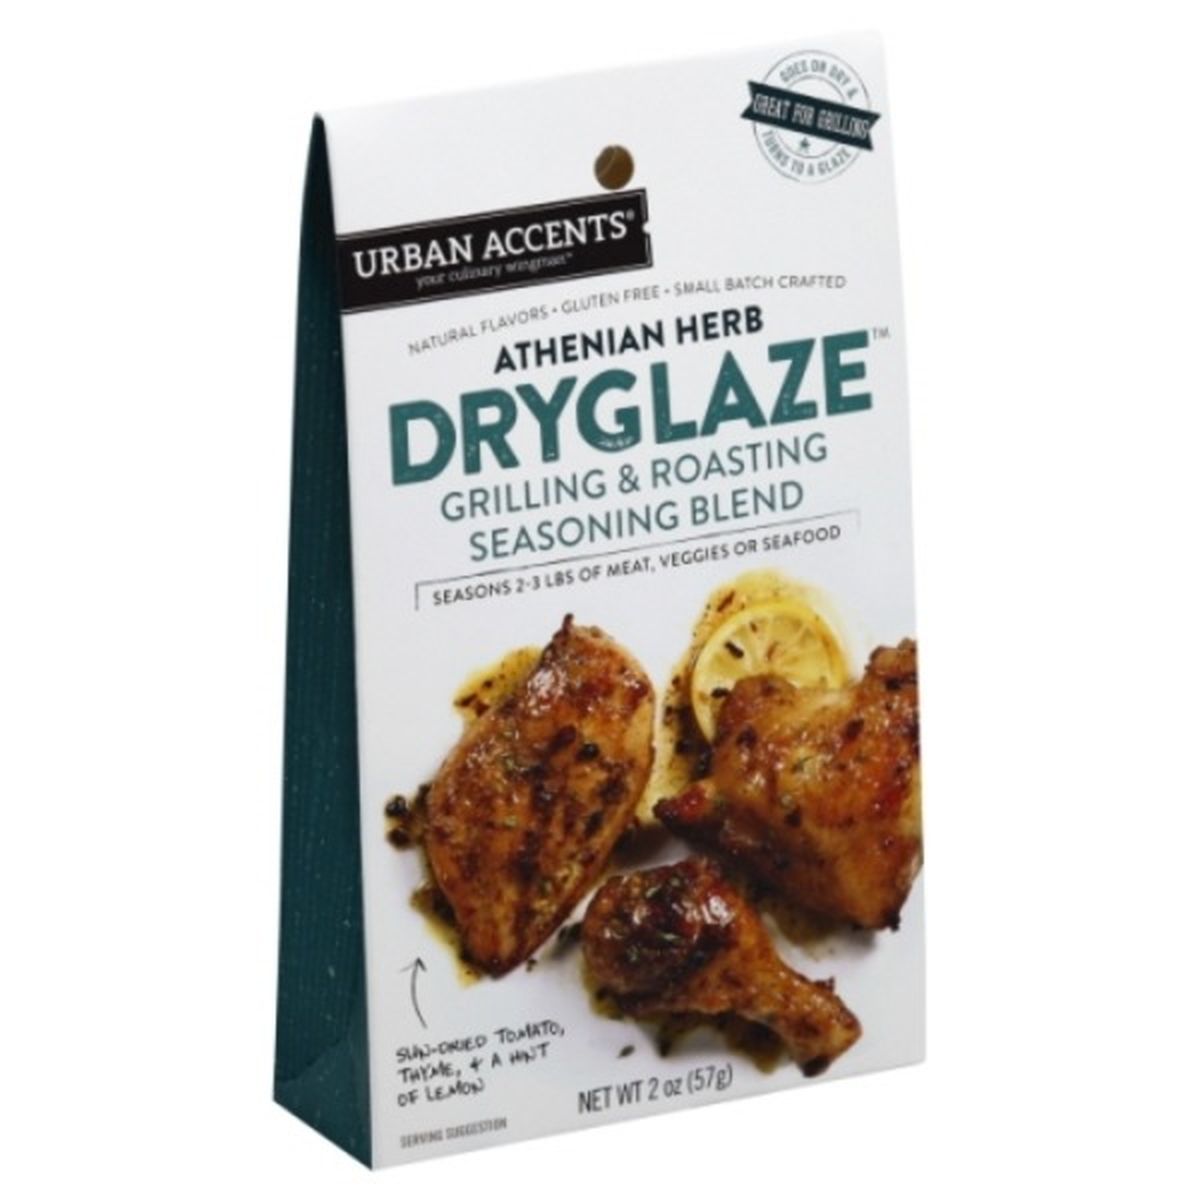 Calories in Urban Accents Dry Glaze, Athenian Herb, Sun-Dried Tomato, Thyme & a Hint of Lemon